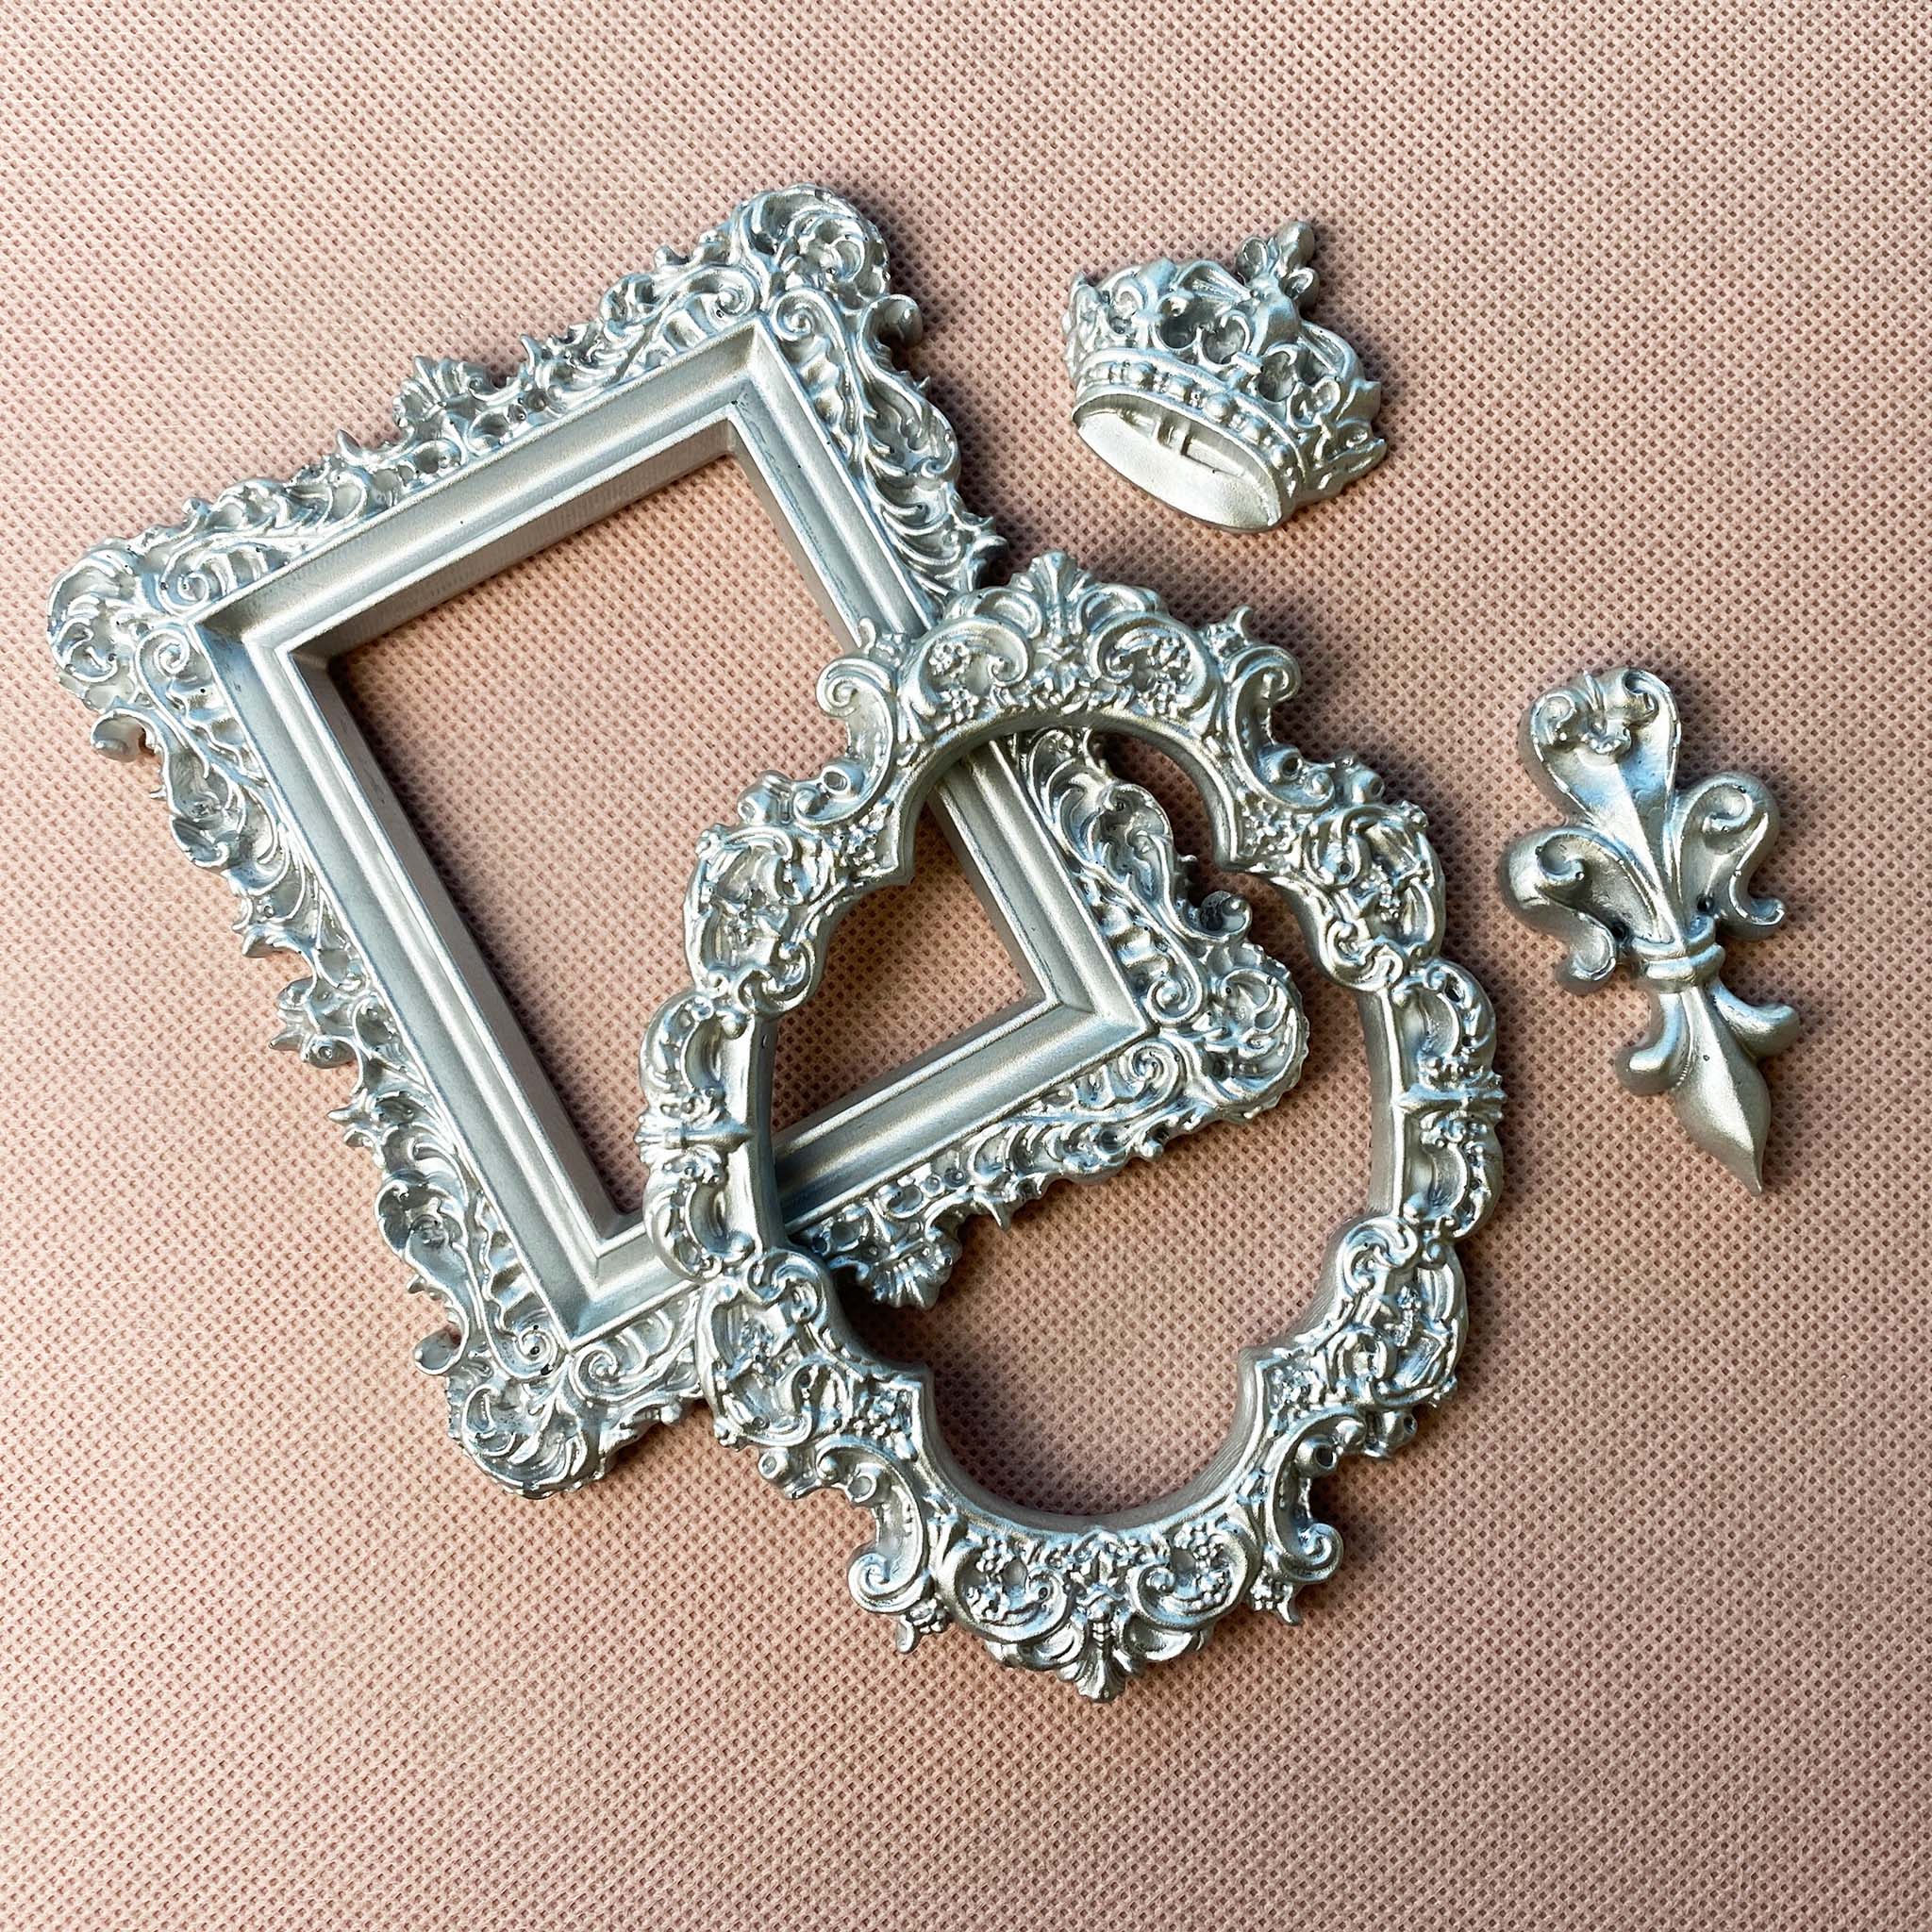 Silver colored castings of an ornate oval and rectangle frame, a small royal crown, and a fluer de lis are against a light beige material background.